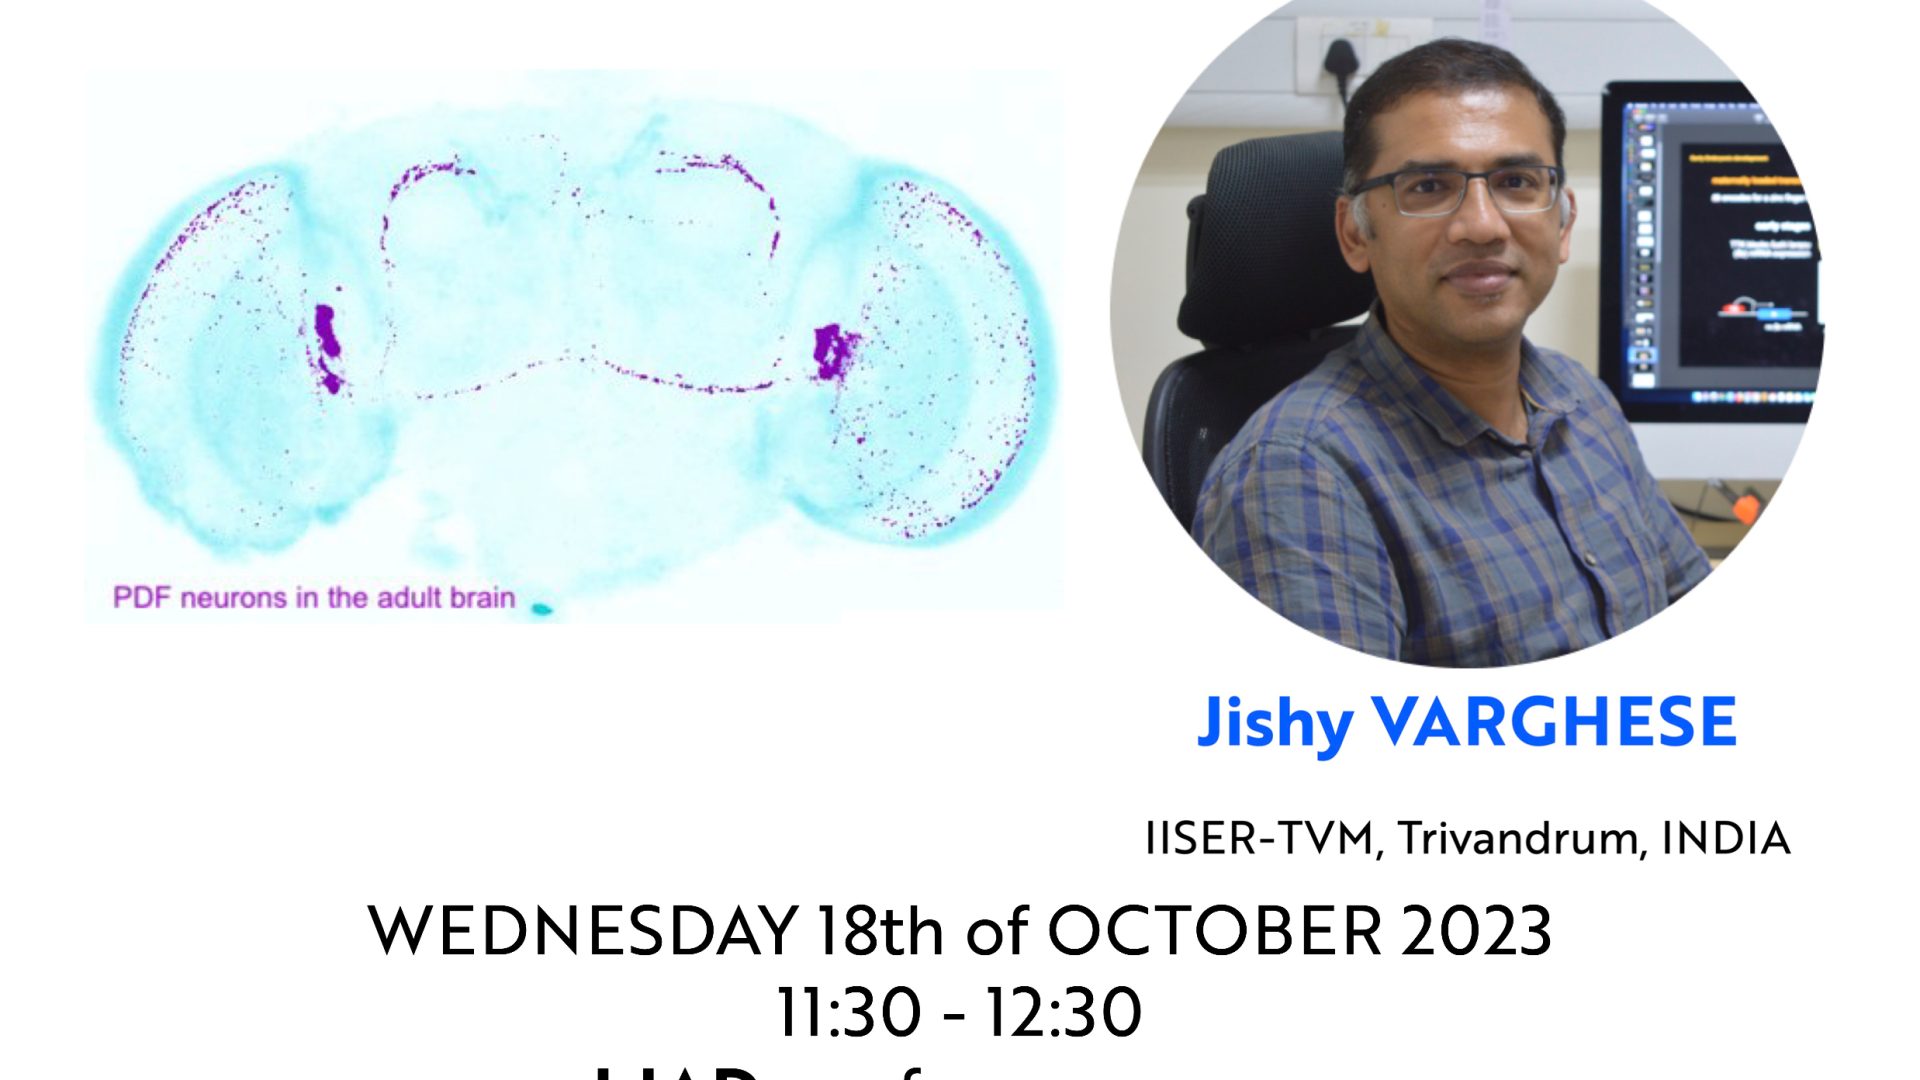 iBV Seminar - Jishy VARGHESE - miR-184, a Drosophila microRNA, plays diverse roles during growth and adult stages